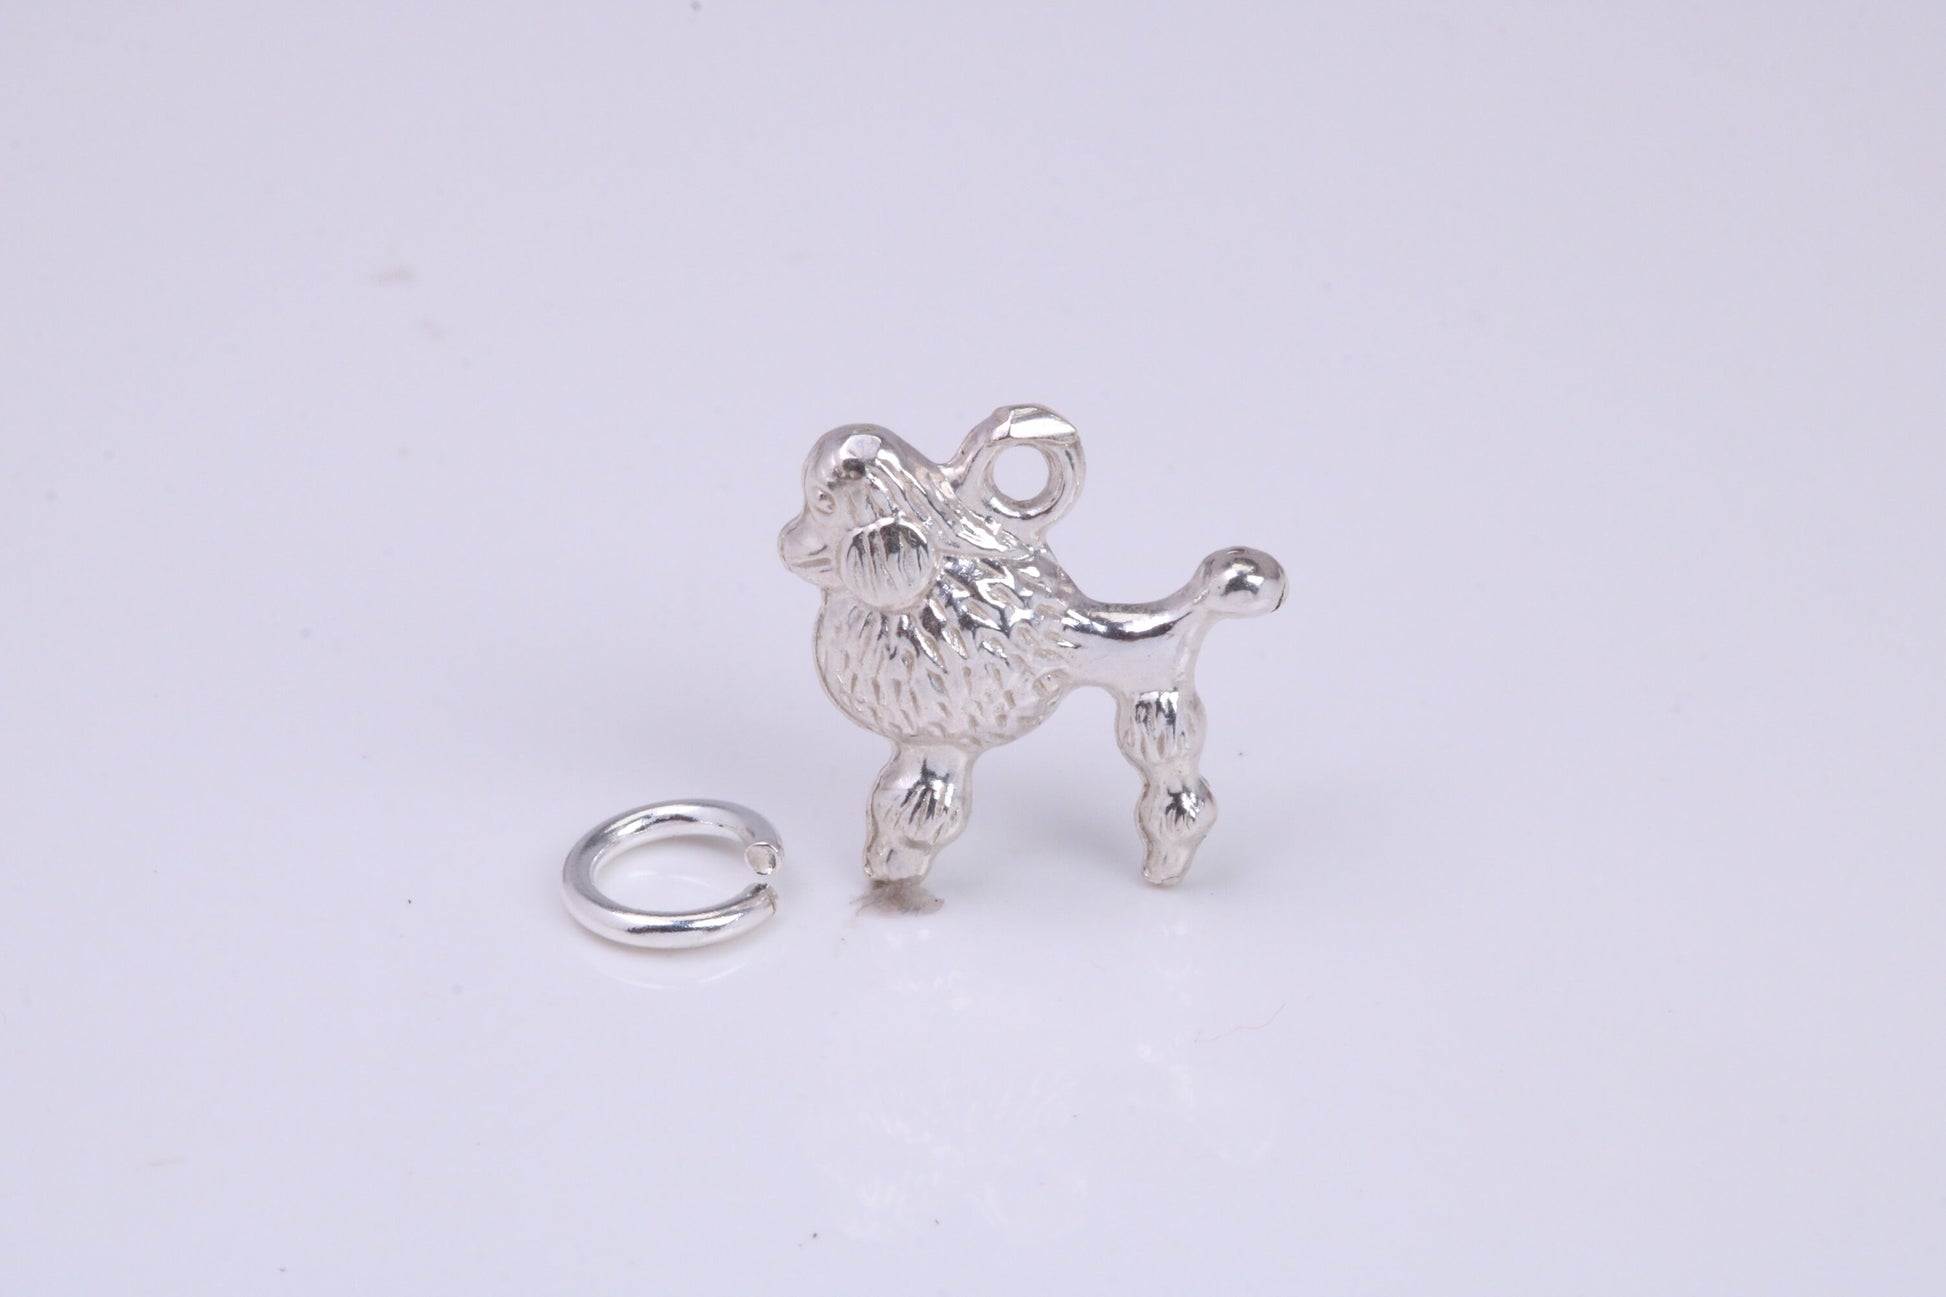 Poodle Dog Charm, Traditional Charm, Made from Solid 925 Grade Sterling Silver, Complete with Attachment Link